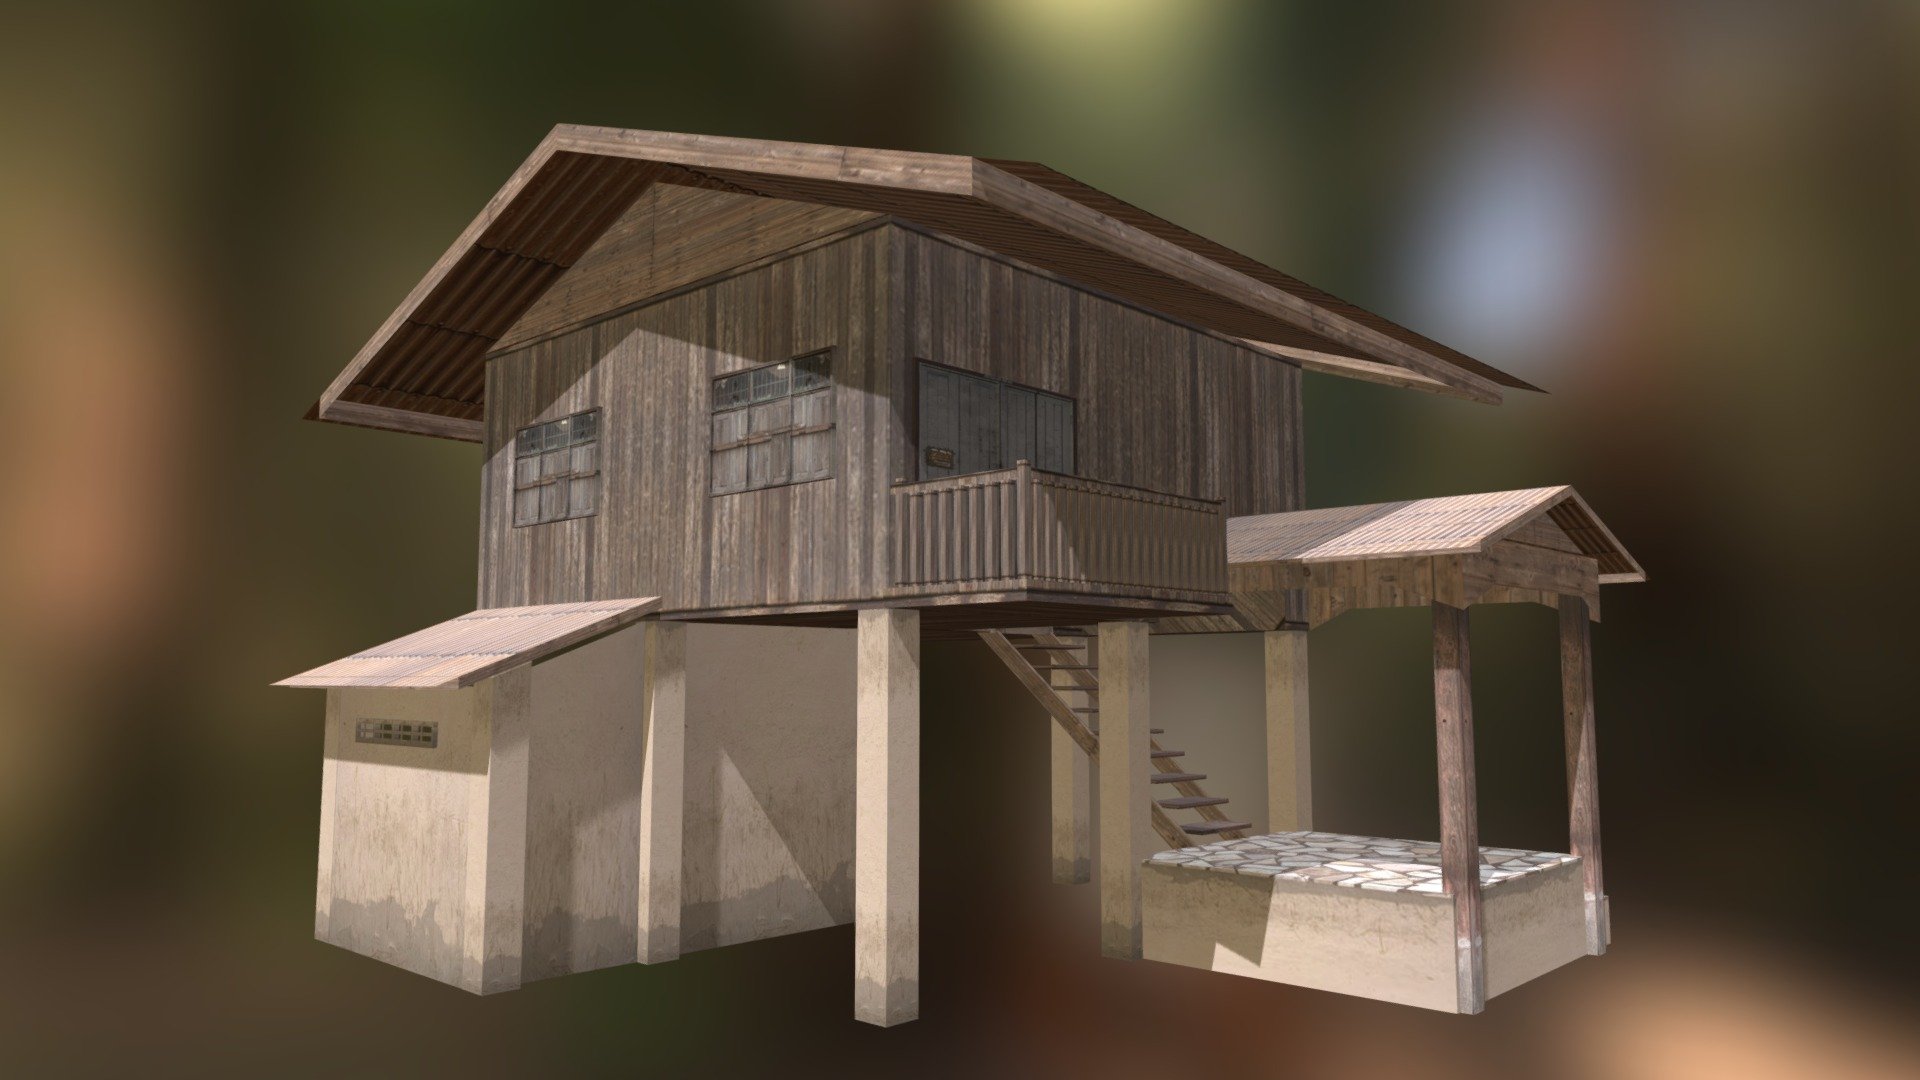 !!!!! Do not download Commercial use is prohibited. !!!! - Thailand Village Country House - 3D model by Seuabas (@NakarasIntaraksa) 3d model